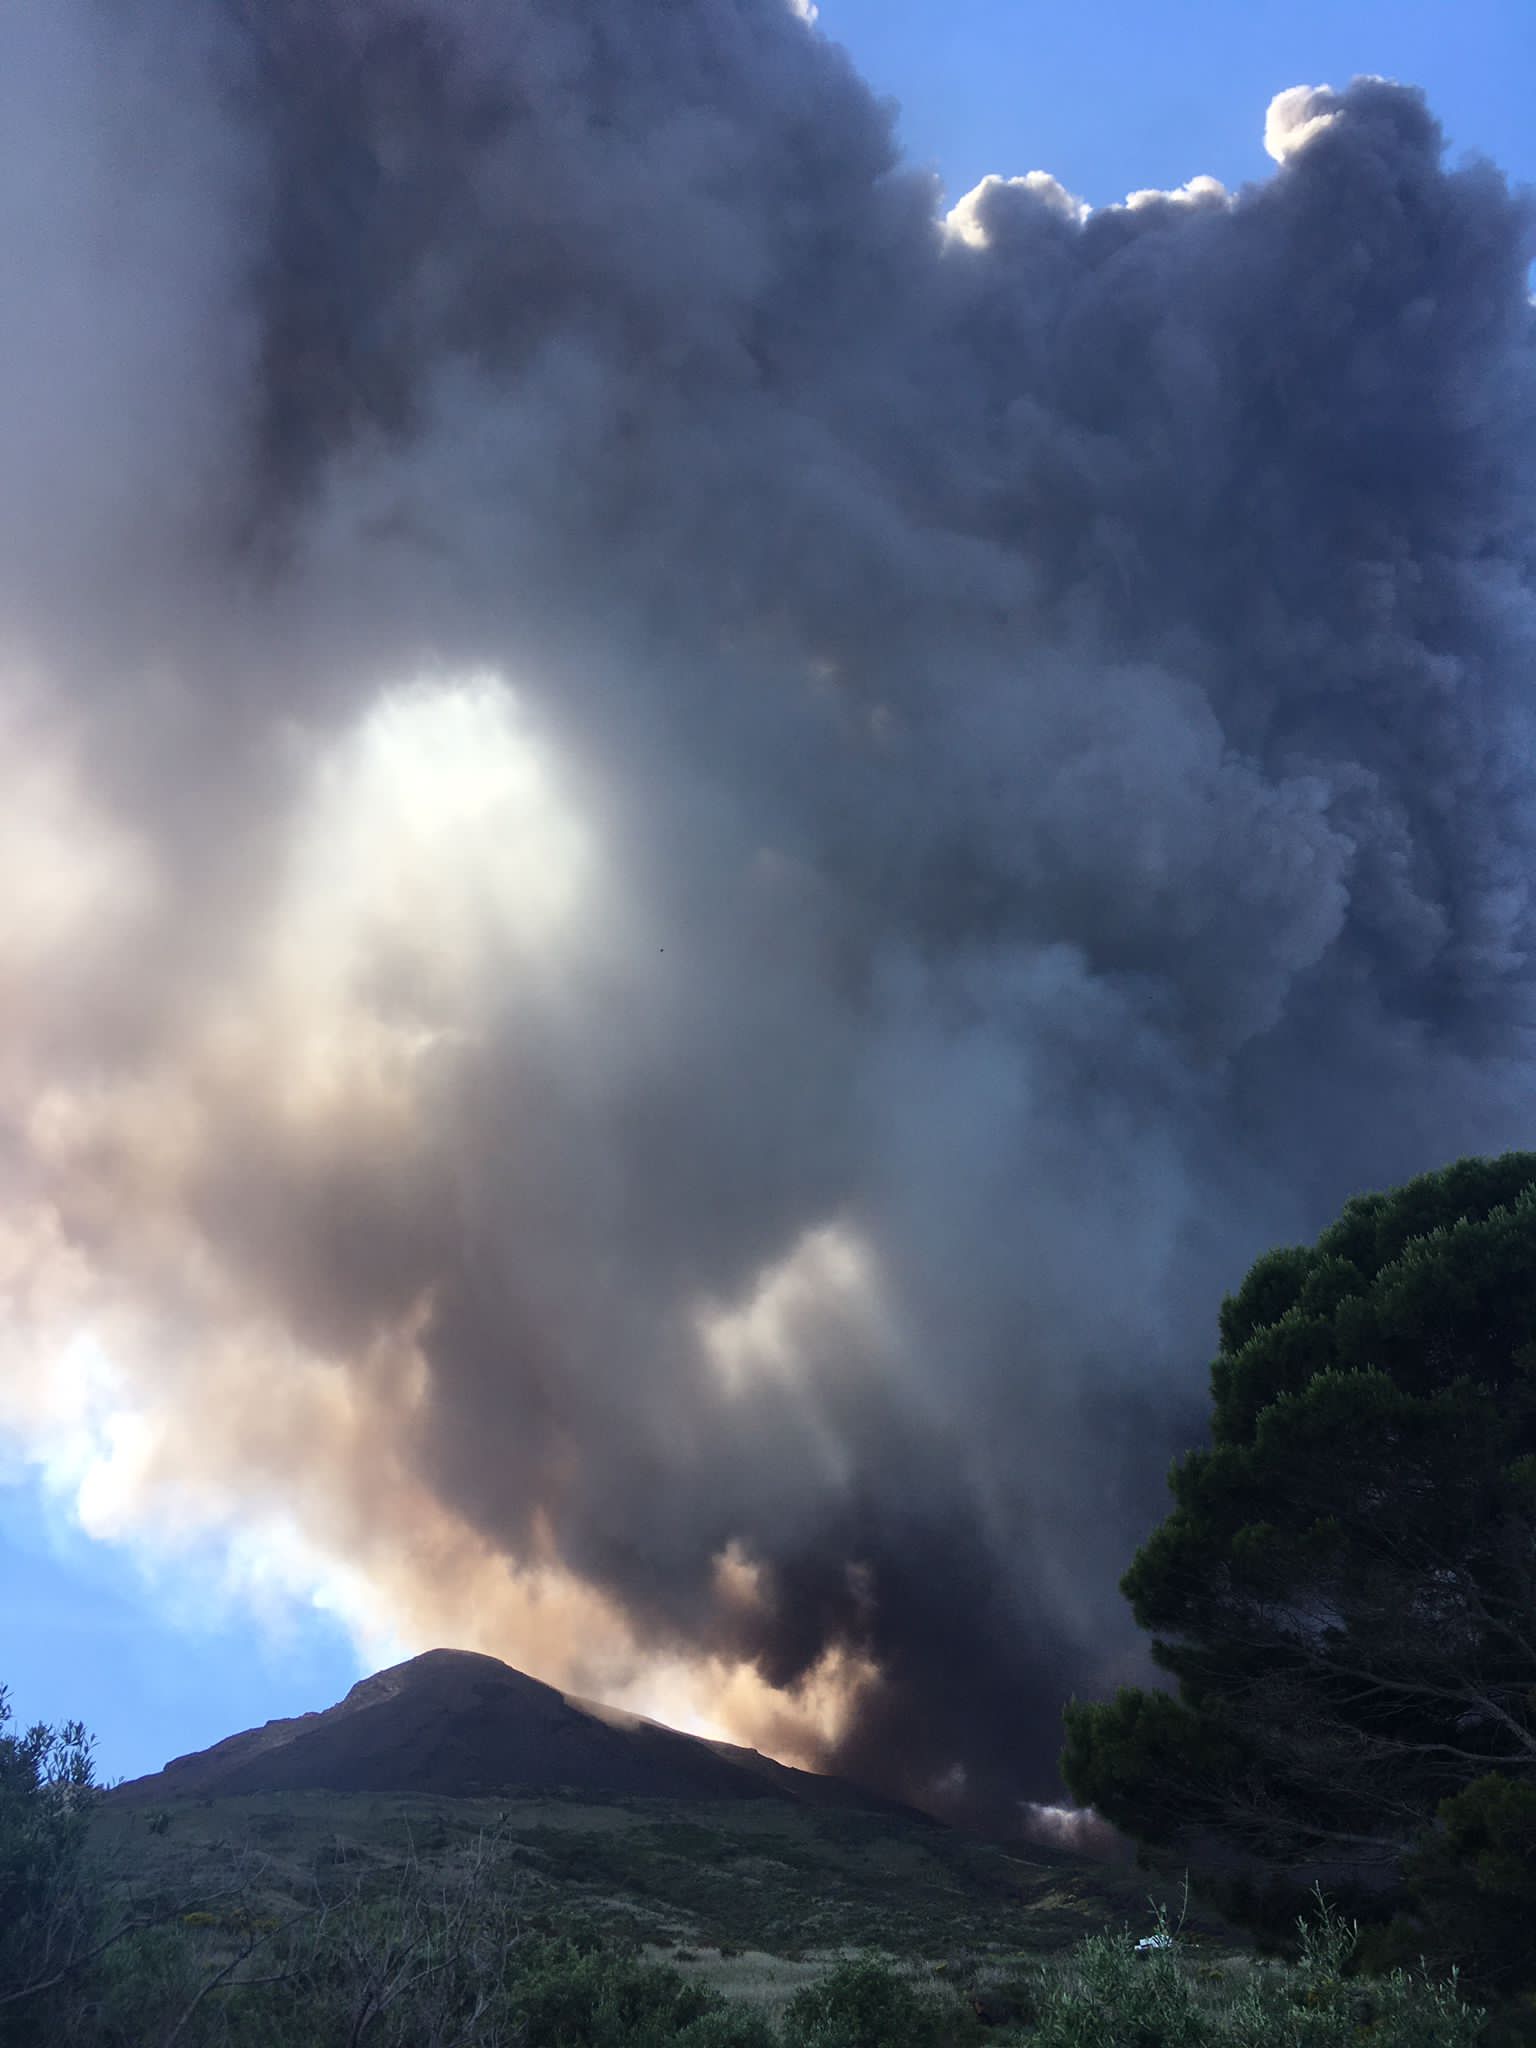 Ash plume from Stromboli this afternoon (image: Francesca Utano)